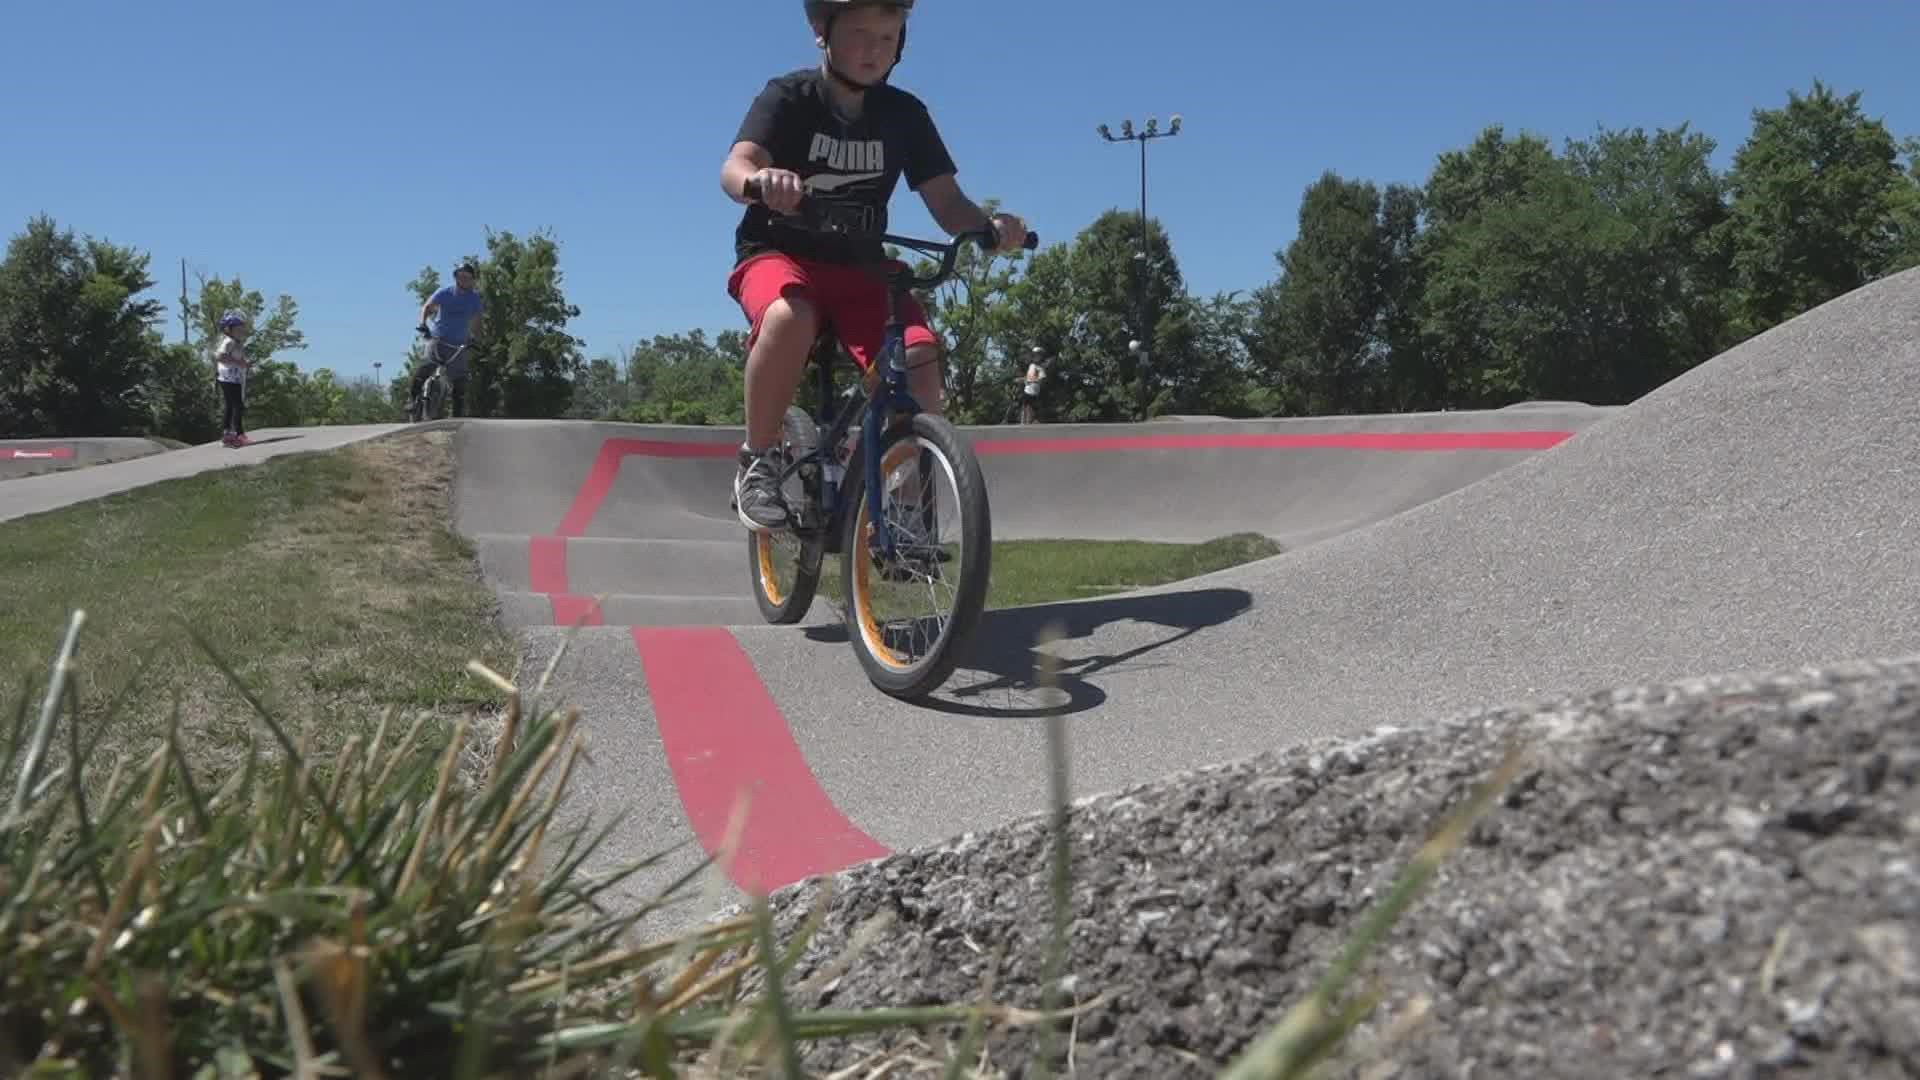 Kinetic Park in St. Charles County will host the biking event where the top 4 qualifiers will go on to compete in Chile! The event is Saturday, Aug. 6.